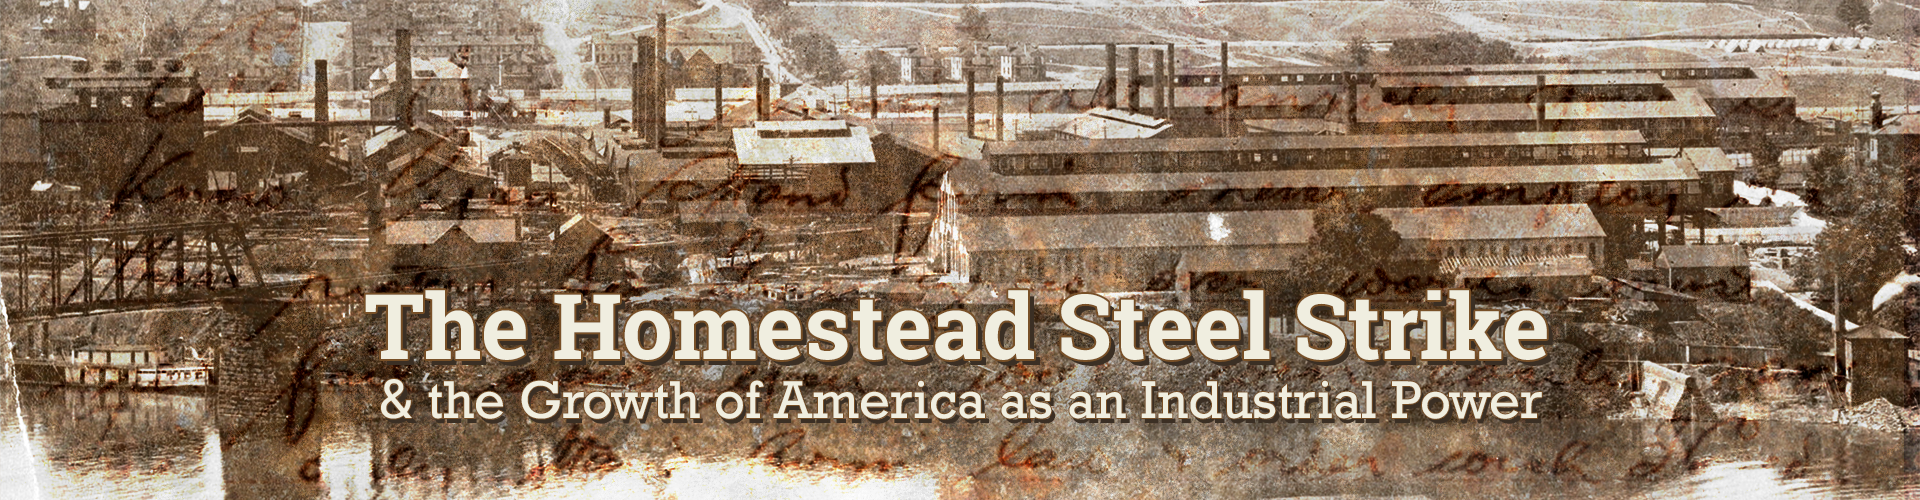 The Homestead Steel Strike & the growth of America as an industrial power